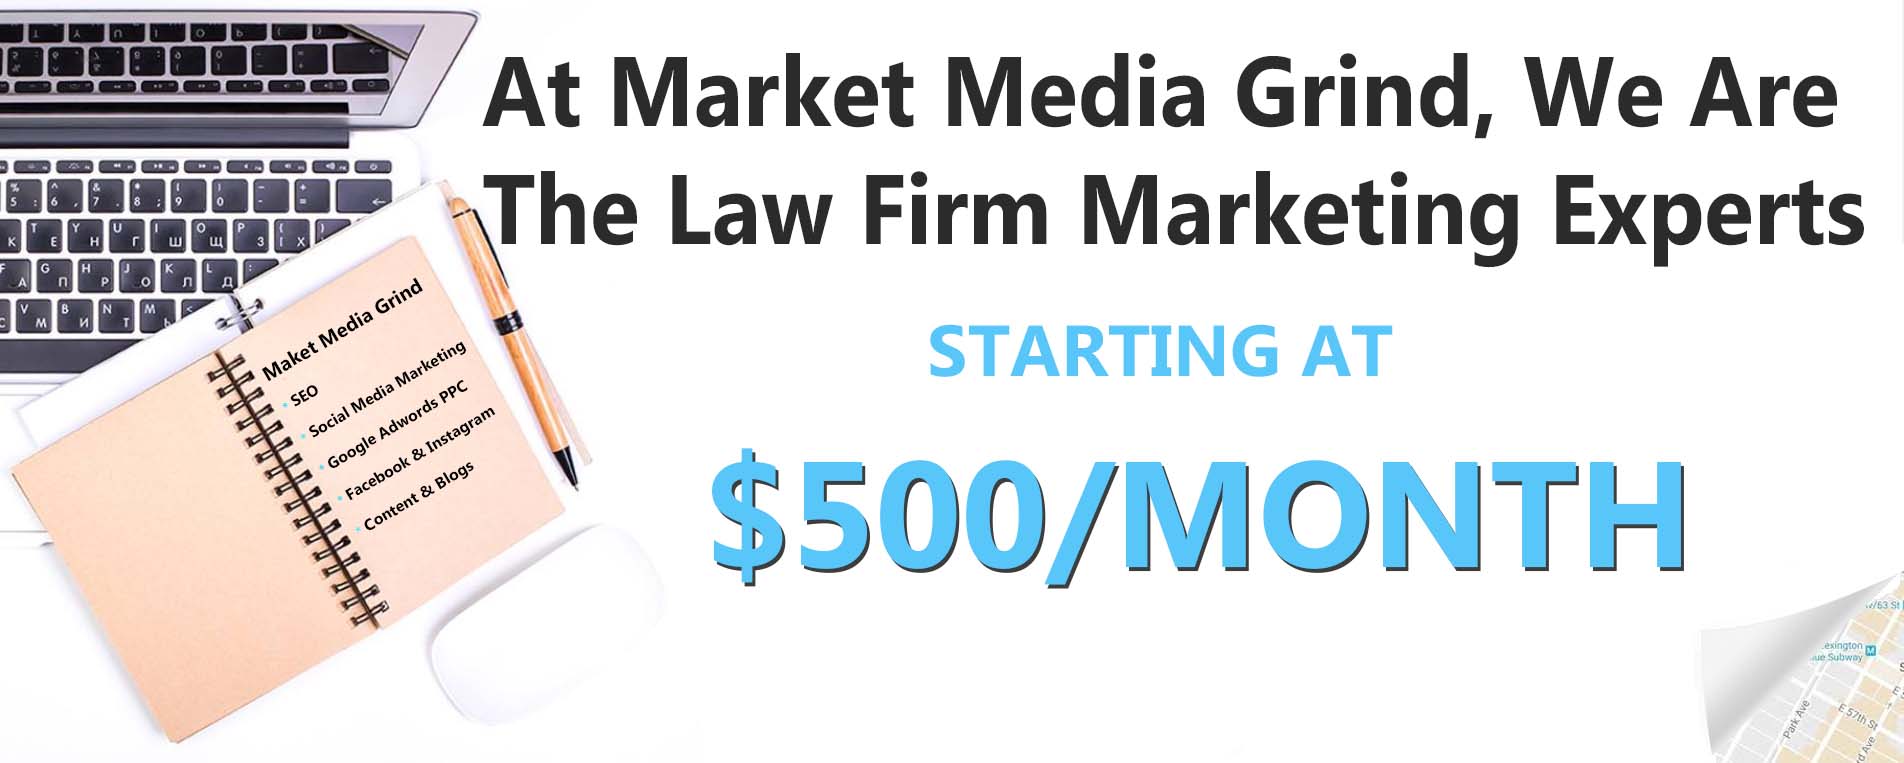 Law Firm Marketing Company in New York City | Law Firm Marketing Company in Manhattan | Law Firm Marketing Company in the Bronx | Law Firm Marketing Company in Brooklyn | Law Firm Marketing Company in Staten Island | Law Firm Marketing Company in Queens | Law Firm Marketing Company in New York City | Law Firm Marketing Company in Long Island City | Law Firm Marketing Company in Maspeth | Law Firm Marketing Company in Sunnyside | Law Firm Marketing Company in New York | Law Firm Marketing Company in Middle Village | Law Firm Marketing Company in Woodside | Law Firm Marketing Company in Long Island City | Law Firm Marketing Company in Jamaica | Law Firm Marketing Company in Ridgewood | Law Firm Marketing Company in Astoria | Law Firm Marketing Company in Jackson Heights | Law Firm Marketing Company in East Elmhurst | Law Firm Marketing Company in Bronx County | Law Firm Marketing Company in Kings County | Law Firm Marketing Company in New York County | Law Firm Marketing Company in Queens County | Law Firm Marketing Company in Richmond County | Law Firm Marketing Company in Newark | Law Firm Marketing Company in Jersey City | Law Firm Marketing Company in Paterson | Law Firm Marketing Company in Woodbridge | Law Firm Marketing Company in Toms River | Law Firm Marketing Company in Hamilton Township | Law Firm Marketing Company in Clifton | Law Firm Marketing Company in Trenton | Law Firm Marketing Company in Camden | Law Firm Marketing Company in Cherry Hill | Law Firm Marketing Company in Passaic | Law Firm Marketing Company in Old Bridge | Law Firm Marketing Company in Bayonne | Law Firm Marketing Company in Vineland | Law Firm Marketing Company in North Bergen | Law Firm Marketing Company in Union | Law Firm Marketing Company in Hoboken | Law Firm Marketing Company in West New York | Law Firm Marketing Company in Perth Amboy | Law Firm Marketing Company in Parsippany | Law Firm Marketing Company in Piscataway | Law Firm Marketing Company in Washington Township | Law Firm Marketing Company in East Brunswick | Law Firm Marketing Company in West Orange | Law Firm Marketing Company in Sayreville | Law Firm Marketing Company in Hackensack | Law Firm Marketing Company in Elizabeth | Law Firm Marketing Company in Linden | Law Firm Marketing Company in Atlantic City | Law Firm Marketing Company in Long Branch Manalapan | Law Firm Marketing Company in Rahway | Law Firm Marketing Company in Bergenfield | Law Firm Marketing Company in Paramus | Law Firm Marketing Company in Point Pleasant Beach | Law Firm Marketing Company in Weehawken | Law Firm Marketing Company in Wildwood | Law Firm Marketing Company in Livingston | Law Firm Marketing Company in Edison | Law Firm Marketing Company in Union City | Law Firm Marketing Company in East Orange | Law Firm Marketing Company in New Brunswick | Law Firm Marketing Company in Atlantic County | Law Firm Marketing Company in Bergen County | Law Firm Marketing Company in Burlington County | Law Firm Marketing Company in Camden County | Law Firm Marketing Company in Cape May County | Law Firm Marketing Company in Cumberland County | Law Firm Marketing Company in Essex County | Law Firm Marketing Company in Gloucester County | Law Firm Marketing Company in Hudson County | Law Firm Marketing Company in Hunterdon County | Law Firm Marketing Company in Mercer County | Law Firm Marketing Company in Middlesex County | Law Firm Marketing Company in Monmouth County | Law Firm Marketing Company in Morris County | Law Firm Marketing Company in Ocean County | Law Firm Marketing Company in Passaic County | Law Firm Marketing Company in Salem County | Law Firm Marketing Company in Somerset County | Law Firm Marketing Company in Sussex County | Law Firm Marketing Company in Union County | Law Firm Marketing Company in Warren County | Law Firm Marketing Company in Philadelphia | Law Firm Marketing Company in Pittsburgh | Law Firm Marketing Company in Allentown | Law Firm Marketing Company in Erie | Law Firm Marketing Company in Reading | Law Firm Marketing Company in Upper Darby | Law Firm Marketing Company in Scranton | Law Firm Marketing Company in Bethlehem | Law Firm Marketing Company in Bensalem | Law Firm Marketing Company in Lancaster | Law Firm Marketing Company in Lower Merion | Law Firm Marketing Company in Abington | Law Firm Marketing Company in Bristol | Law Firm Marketing Company in Levittown | Law Firm Marketing Company in Harrisburg | Law Firm Marketing Company in Haverford | Law Firm Marketing Company in Altoona | Law Firm Marketing Company in York | Law Firm Marketing Company in State College | Law Firm Marketing Company in Wilkes-Barre | Law Firm Marketing Company in Birmingham AL | Law Firm Marketing Company in Tucson, AZ | Law Firm Marketing Company in Phoenix, AZ | Law Firm Marketing Company in Los Angeles, CA | Law Firm Marketing Company in San Diego, CA | Law Firm Marketing Company in San Jose, CA | Law Firm Marketing Company in San Francisco, CA | Law Firm Marketing Company in Sacramento, CA | Law Firm Marketing Company in Long Beach, CA | Law Firm Marketing Company in Oakland, CA | Law Firm Marketing Company in Denver, CO | Law Firm Marketing Company in Jacksonville, FL | Law Firm Marketing Company in Miami, FL | Law Firm Marketing Company in Atlanta, GA | Law Firm Marketing Company in Chicago IL | Law Firm Marketing Company in Indianapolis, IN | Law Firm Marketing Company in New Orleans, LA | Law Firm Marketing Company in Baltimore, MD | Law Firm Marketing Company in Boston, MA | Law Firm Marketing Company in Detroit, MI | Law Firm Marketing Company in Minneapolis, MN | Law Firm Marketing Company in Saint Paul, MN | Law Firm Marketing Company in Kansas City, MO | Law Firm Marketing Company in St. Louis, MO | Law Firm Marketing Company in Omaha, NE | Law Firm Marketing Company in Albuquerque, NM | Law Firm Marketing Company in Charlotte, NC | Law Firm Marketing Company in Columbus, OH | Law Firm Marketing Company in Cleveland, OH | Law Firm Marketing Company in Cincinnati, OH | Law Firm Marketing Company in Oklahoma City, OK | Law Firm Marketing Company in Portland, OR | Law Firm Marketing Company in Providence, RI | Law Firm Marketing Company in Nashville, TN | Law Firm Marketing Company in Memphis, TN | Law Firm Marketing Company in Houston, TX | Law Firm Marketing Company in San Antonio, TX | Law Firm Marketing Company in Dallas, TX | Law Firm Marketing Company in Austin, TX | Law Firm Marketing Company in Fort Worth, TX | Law Firm Marketing Company in El Paso, TX | Law Firm Marketing Company in Virginia Beach, VA | Law Firm Marketing Company in Seattle, WA | Law Firm Marketing Company in Milwaukee, WI | Law Firm Marketing Company in Washington D.C. | Law Firm Marketing Company in New Jersey | Law Firm Marketing Company in Pennsylvania | Law Firm Marketing Company in America | Law Firm Marketing Company in USA | Law Firm Marketing Company in Puerto Rico | Law Firm Marketing Company in California | Law Firm Marketing Company in Alabama | Law Firm Marketing Company in Arizona | Law Firm Marketing Company in Florida | Law Firm Marketing Company in Georgia | Law Firm Marketing Company in Illinois | Law Firm Marketing Company in Indiana | Law Firm Marketing Company in Louisiana | Law Firm Marketing Company in Maryland | Law Firm Marketing Company in Massachusettes | Law Firm Marketing Company in Michigan | Law Firm Marketing Company in Minnesota | Law Firm Marketing Company in Missouri | Law Firm Marketing Company in Nebraska | Law Firm Marketing Company in New Jersey | Law Firm Marketing Company in New Mexico | Law Firm Marketing Company in North Carolina | Law Firm Marketing Company in Ohio | Law Firm Marketing Company in OKC | Law Firm Marketing Company in Olkahoma | Law Firm Marketing Company in Oregon | Law Firm Marketing Company in Rhode Island | Law Firm Marketing Company in Tennessee | Law Firm Marketing Company in Texas | Law Firm Marketing Company in Virginia | Law Firm Marketing Company in Washington State | Law Firm Marketing Company in Wisconsin | Law Firm Marketing Company in District Of Columbia | Law Firm Marketing Company in Hawaii | Law Firm Marketing Company in Virgin Islands | Market Media Grind | Top Law Firm Marketing Company | Legal Marketing for Attorneys | Legal Marketing for Law Firms | Legal Marketing for Attorneys in New York City | Legal Marketing for Attorneys in Manhattan | Legal Marketing for Attorneys in the Bronx | Legal Marketing for Attorneys in Brooklyn | Legal Marketing for Attorneys in Staten Island | Legal Marketing for Attorneys in Queens | Legal Marketing for Attorneys in New York City | Legal Marketing for Attorneys in Long Island City | Legal Marketing for Attorneys in Maspeth | Legal Marketing for Attorneys in Sunnyside | Legal Marketing for Attorneys in New York | Legal Marketing for Attorneys in Middle Village | Legal Marketing for Attorneys in Woodside | Legal Marketing for Attorneys in Long Island City | Legal Marketing for Attorneys in Jamaica | Legal Marketing for Attorneys in Ridgewood | Legal Marketing for Attorneys in Astoria | Legal Marketing for Attorneys in Jackson Heights | Legal Marketing for Attorneys in East Elmhurst | Legal Marketing for Attorneys in Bronx County | Legal Marketing for Attorneys in Kings County | Legal Marketing for Attorneys in New York County | Legal Marketing for Attorneys in Queens County | Legal Marketing for Attorneys in Richmond County | Legal Marketing for Attorneys in Newark | Legal Marketing for Attorneys in Jersey City | Legal Marketing for Attorneys in Paterson | Legal Marketing for Attorneys in Woodbridge | Legal Marketing for Attorneys in Toms River | Legal Marketing for Attorneys in Hamilton Township | Legal Marketing for Attorneys in Clifton | Legal Marketing for Attorneys in Trenton | Legal Marketing for Attorneys in Camden | Legal Marketing for Attorneys in Cherry Hill | Legal Marketing for Attorneys in Passaic | Legal Marketing for Attorneys in Old Bridge | Legal Marketing for Attorneys in Bayonne | Legal Marketing for Attorneys in Vineland | Legal Marketing for Attorneys in North Bergen | Legal Marketing for Attorneys in Union | Legal Marketing for Attorneys in Hoboken | Legal Marketing for Attorneys in West New York | Legal Marketing for Attorneys in Perth Amboy | Legal Marketing for Attorneys in Parsippany | Legal Marketing for Attorneys in Piscataway | Legal Marketing for Attorneys in Washington Township | Legal Marketing for Attorneys in East Brunswick | Legal Marketing for Attorneys in West Orange | Legal Marketing for Attorneys in Sayreville | Legal Marketing for Attorneys in Hackensack | Legal Marketing for Attorneys in Elizabeth | Legal Marketing for Attorneys in Linden | Legal Marketing for Attorneys in Atlantic City | Legal Marketing for Attorneys in Long Branch Manalapan | Legal Marketing for Attorneys in Rahway | Legal Marketing for Attorneys in Bergenfield | Legal Marketing for Attorneys in Paramus | Legal Marketing for Attorneys in Point Pleasant Beach | Legal Marketing for Attorneys in Weehawken | Legal Marketing for Attorneys in Wildwood | Legal Marketing for Attorneys in Livingston | Legal Marketing for Attorneys in Edison | Legal Marketing for Attorneys in Union City | Legal Marketing for Attorneys in East Orange | Legal Marketing for Attorneys in New Brunswick | Legal Marketing for Attorneys in Atlantic County | Legal Marketing for Attorneys in Bergen County | Legal Marketing for Attorneys in Burlington County | Legal Marketing for Attorneys in Camden County | Legal Marketing for Attorneys in Cape May County | Legal Marketing for Attorneys in Cumberland County | Legal Marketing for Attorneys in Essex County | Legal Marketing for Attorneys in Gloucester County | Legal Marketing for Attorneys in Hudson County | Legal Marketing for Attorneys in Hunterdon County | Legal Marketing for Attorneys in Mercer County | Legal Marketing for Attorneys in Middlesex County | Legal Marketing for Attorneys in Monmouth County | Legal Marketing for Attorneys in Morris County | Legal Marketing for Attorneys in Ocean County | Legal Marketing for Attorneys in Passaic County | Legal Marketing for Attorneys in Salem County | Legal Marketing for Attorneys in Somerset County | Legal Marketing for Attorneys in Sussex County | Legal Marketing for Attorneys in Union County | Legal Marketing for Attorneys in Warren County | Legal Marketing for Attorneys in Philadelphia | Legal Marketing for Attorneys in Pittsburgh | Legal Marketing for Attorneys in Allentown | Legal Marketing for Attorneys in Erie | Legal Marketing for Attorneys in Reading | Legal Marketing for Attorneys in Upper Darby | Legal Marketing for Attorneys in Scranton | Legal Marketing for Attorneys in Bethlehem | Legal Marketing for Attorneys in Bensalem | Legal Marketing for Attorneys in Lancaster | Legal Marketing for Attorneys in Lower Merion | Legal Marketing for Attorneys in Abington | Legal Marketing for Attorneys in Bristol | Legal Marketing for Attorneys in Levittown | Legal Marketing for Attorneys in Harrisburg | Legal Marketing for Attorneys in Haverford | Legal Marketing for Attorneys in Altoona | Legal Marketing for Attorneys in York | Legal Marketing for Attorneys in State College | Legal Marketing for Attorneys in Wilkes-Barre | Legal Marketing for Attorneys in Birmingham AL | Legal Marketing for Attorneys in Tucson, AZ | Legal Marketing for Attorneys in Phoenix, AZ | Legal Marketing for Attorneys in Los Angeles, CA | Legal Marketing for Attorneys in San Diego, CA | Legal Marketing for Attorneys in San Jose, CA | Legal Marketing for Attorneys in San Francisco, CA | Legal Marketing for Attorneys in Sacramento, CA | Legal Marketing for Attorneys in Long Beach, CA | Legal Marketing for Attorneys in Oakland, CA | Legal Marketing for Attorneys in Denver, CO | Legal Marketing for Attorneys in Jacksonville, FL | Legal Marketing for Attorneys in Miami, FL | Legal Marketing for Attorneys in Atlanta, GA | Legal Marketing for Attorneys in Chicago IL | Legal Marketing for Attorneys in Indianapolis, IN | Legal Marketing for Attorneys in New Orleans, LA | Legal Marketing for Attorneys in Baltimore, MD | Legal Marketing for Attorneys in Boston, MA | Legal Marketing for Attorneys in Detroit, MI | Legal Marketing for Attorneys in Minneapolis, MN | Legal Marketing for Attorneys in Saint Paul, MN | Legal Marketing for Attorneys in Kansas City, MO | Legal Marketing for Attorneys in St. Louis, MO | Legal Marketing for Attorneys in Omaha, NE | Legal Marketing for Attorneys in Albuquerque, NM | Legal Marketing for Attorneys in Charlotte, NC | Legal Marketing for Attorneys in Columbus, OH | Legal Marketing for Attorneys in Cleveland, OH | Legal Marketing for Attorneys in Cincinnati, OH | Legal Marketing for Attorneys in Oklahoma City, OK | Legal Marketing for Attorneys in Portland, OR | Legal Marketing for Attorneys in Providence, RI | Legal Marketing for Attorneys in Nashville, TN | Legal Marketing for Attorneys in Memphis, TN | Legal Marketing for Attorneys in Houston, TX | Legal Marketing for Attorneys in San Antonio, TX | Legal Marketing for Attorneys in Dallas, TX | Legal Marketing for Attorneys in Austin, TX | Legal Marketing for Attorneys in Fort Worth, TX | Legal Marketing for Attorneys in El Paso, TX | Legal Marketing for Attorneys in Virginia Beach, VA | Legal Marketing for Attorneys in Seattle, WA | Legal Marketing for Attorneys in Milwaukee, WI | Legal Marketing for Attorneys in Washington D.C. | Legal Marketing for Attorneys in New Jersey | Legal Marketing for Attorneys in Pennsylvania | Legal Marketing for Attorneys in America | Legal Marketing for Attorneys in USA | Legal Marketing for Attorneys in Puerto Rico | Legal Marketing for Attorneys in California | Legal Marketing for Attorneys in Alabama | Legal Marketing for Attorneys in Arizona | Legal Marketing for Attorneys in Florida | Legal Marketing for Attorneys in Georgia | Legal Marketing for Attorneys in Illinois | Legal Marketing for Attorneys in Indiana | Legal Marketing for Attorneys in Louisiana | Legal Marketing for Attorneys in Maryland | Legal Marketing for Attorneys in Massachusettes | Legal Marketing for Attorneys in Michigan | Legal Marketing for Attorneys in Minnesota | Legal Marketing for Attorneys in Missouri | Legal Marketing for Attorneys in Nebraska | Legal Marketing for Attorneys in New Jersey | Legal Marketing for Attorneys in New Mexico | Legal Marketing for Attorneys in North Carolina | Legal Marketing for Attorneys in Ohio | Legal Marketing for Attorneys in OKC | Legal Marketing for Attorneys in Olkahoma | Legal Marketing for Attorneys in Oregon | Legal Marketing for Attorneys in Rhode Island | Legal Marketing for Attorneys in Tennessee | Legal Marketing for Attorneys in Texas | Legal Marketing for Attorneys in Virginia | Legal Marketing for Attorneys in Washington State | Legal Marketing for Attorneys in Wisconsin | Legal Marketing for Attorneys in District Of Columbia | Legal Marketing for Attorneys in Hawaii | Legal Marketing for Attorneys in Virgin Islands | Marketing Legal para Abogados | Mercadeo Legal para Abogados en la República Dominicana | Birmingham, Montgomery, Mobile, Huntsville, Tuscaloosa, Alababma, Anchorage, Alaska, Chandler, Gilbert, Glendale, Mesa, Phoenix, Scottsdale, Tucson, Arizona, Anaheim, Bakersfield, Chula Vista, Fremont, Fresno, Irvine, Long Beach, Los Angeles, Oakland, Riverside, Sacramento, San Bernardino, San Diego, San Francisco, San Jose, Santa Ana, Stockton, California, Aurora, Colorado Springs, Denver, Colorado, Hialeah, Jacksonville, Miami, Orlando, St. Petersburg, Tampa, Florida, Atlanta, Georgia, Urban Honolulu, Hawaii, Moines, Iowa, Boise City, Idaho, Chicago, Illinois, Fort Wayne, Indiana, Indianapolis, Wichita, Kansas, Louisville, Kentucky, Baton Rouge, New Orleans, Louisiana, Boston, Massachusetts, Baltimore, Maryland, Detroit, Michigan, Minneapolis, St. Paul, Minnesota, Kansas City, St. Louis, Missouri, Charlotte, Durham, Greensboro, Raleigh, North Carolina, Lincoln, Omaha, Nebraska, Albuquerque, New Mexico, Henderson, Las Vegas, North Las Vegas, Paradise, Reno, Nevada, Cincinnati, Cleveland, Columbus, Toledo, Ohio, Oklahoma City, Tulsa, Oklahoma, Portland, Oregon, Memphis, Nashville, Tennessee, Arlington, Austin, Corpus Christi, Dallas, El Paso, Fort Worth, Garland, Houston, Irving, Laredo, Lubbock, Plano, San Antonio, Texas, Arlington, Chesapeake, Norfolk, Richmond, Virginia Beach, Virginia, Seattle, Washington, Madison, Milwaukee, Wisconsin, Alabama, Arkansas, Connecticut, Delaware, District of Columbia, Boise, Idaho, Des Moines, Iowa, Portland, Maine, Jackson, Mississippi, Billings, Montana, Manchester, New Hampshire, Fargo, North Dakota, Providence, Rhode Island, Columbia, Charleston, South Carolina, Sioux Falls, South Dakota, Salt Lake City, Utah, Burlington, Vermont, West Virginia, Wyoming and Washington D.C. . . Our Top rated SEO & Internet Marketing Company offer a free website and business consultation.